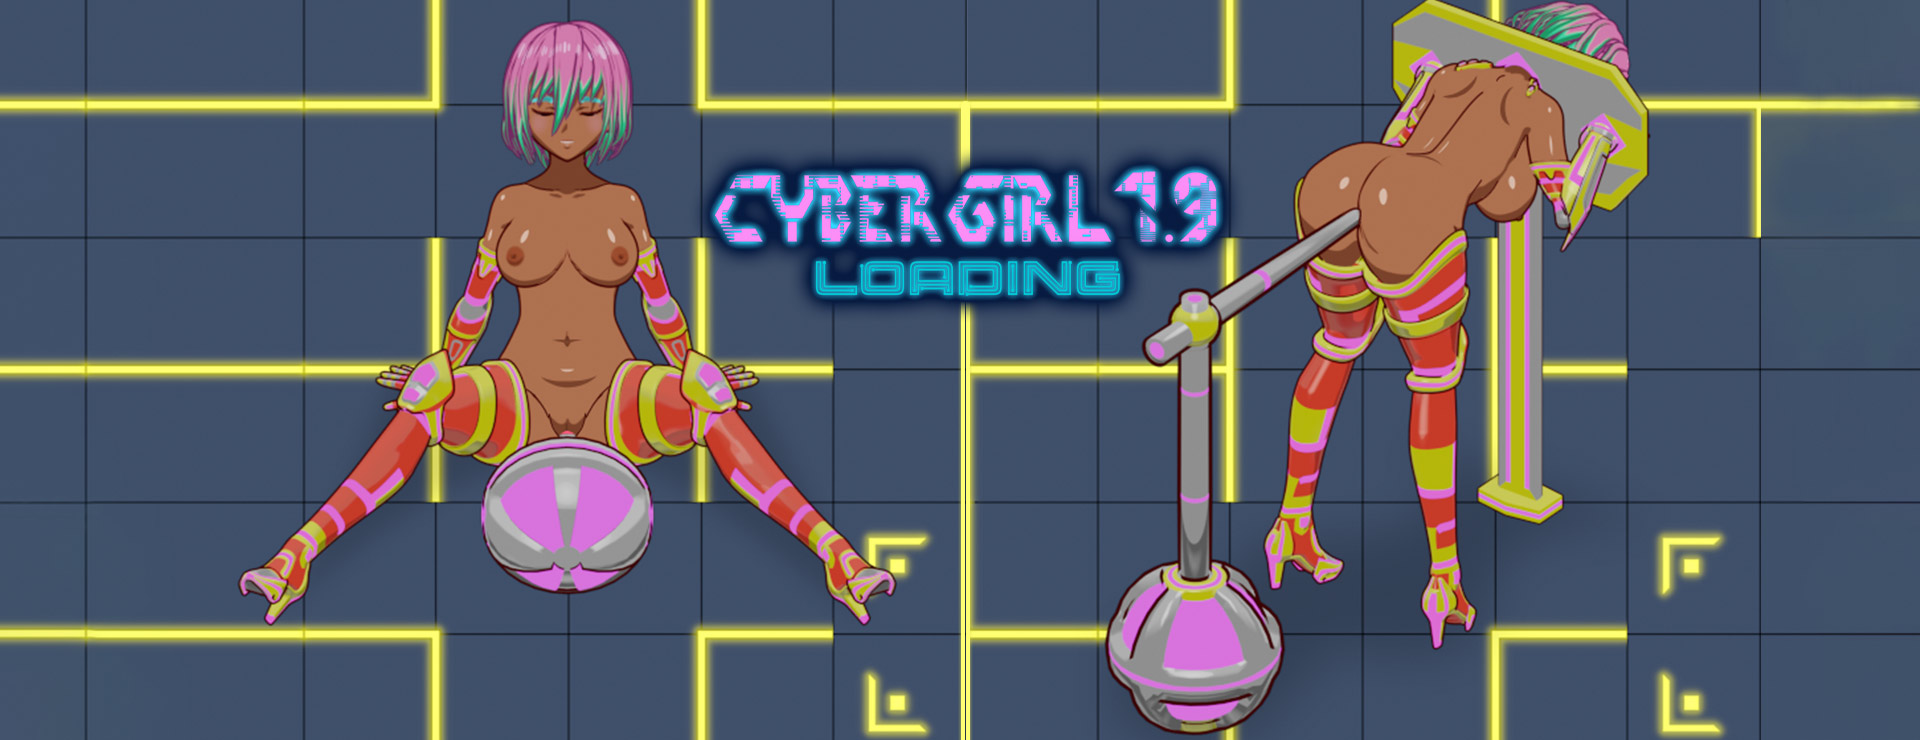 Cyber Girl 1.9 LOADING - Action Adventure Game